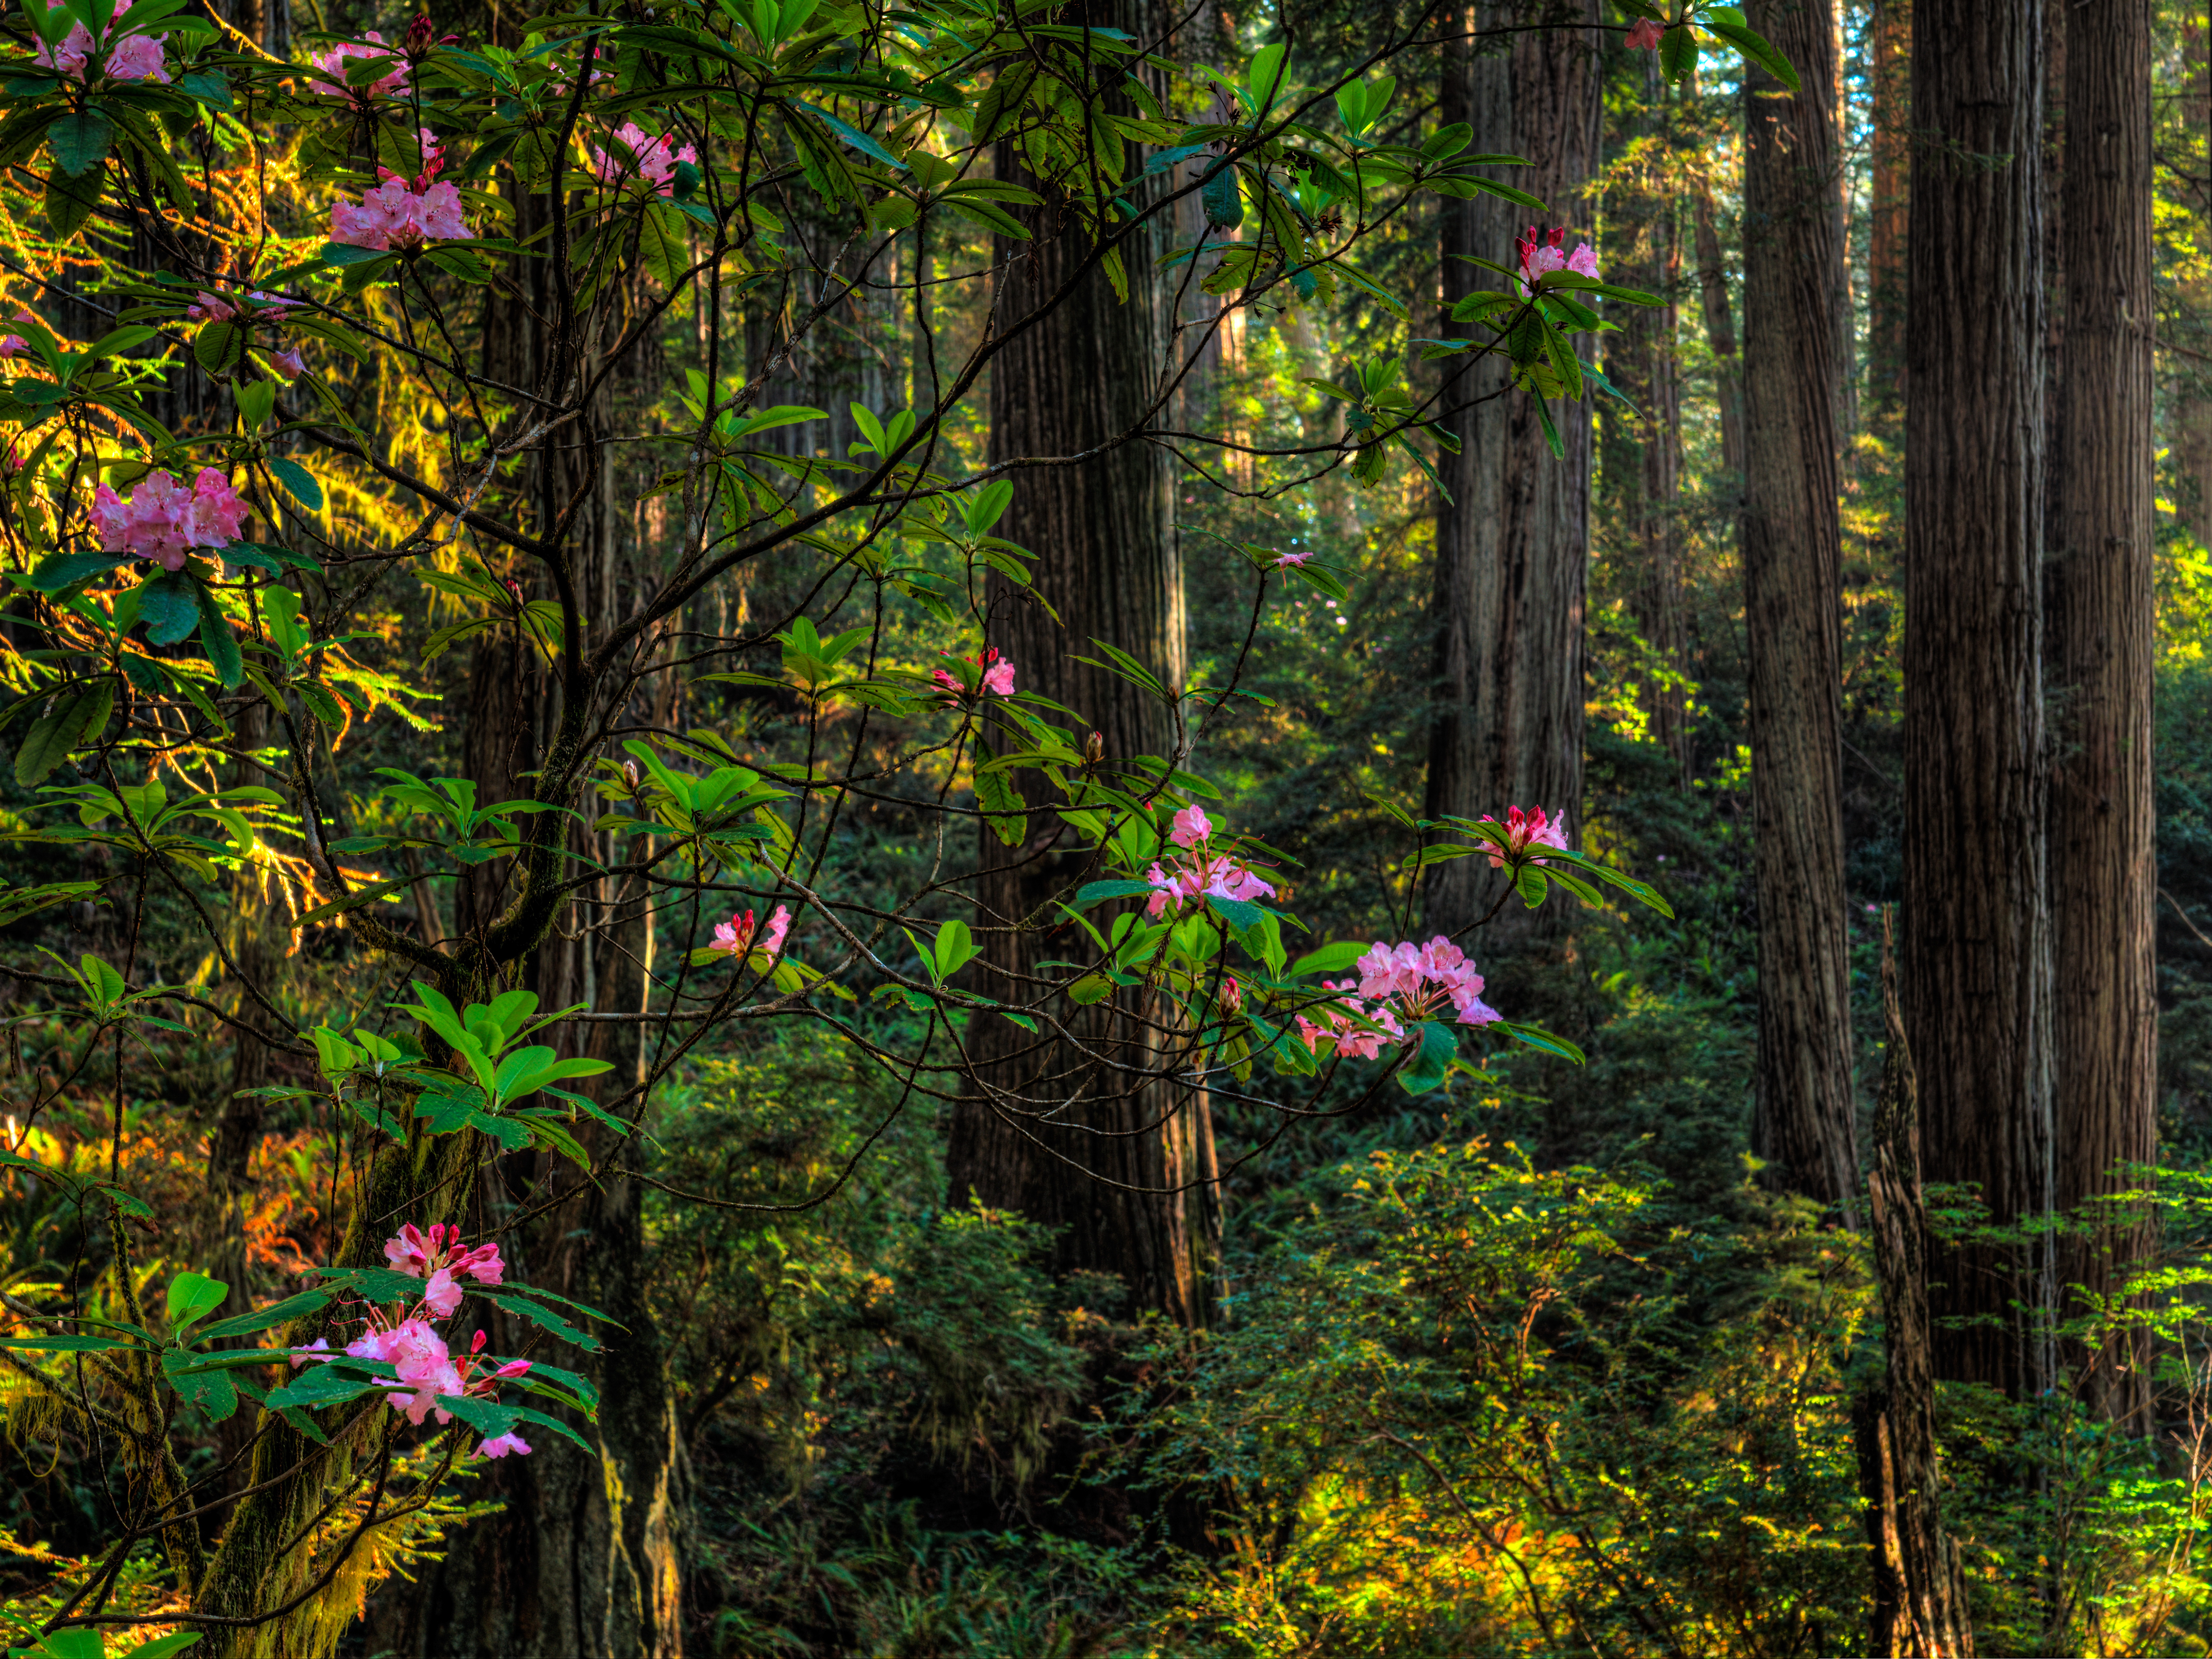 Rhododendruns in the Forest